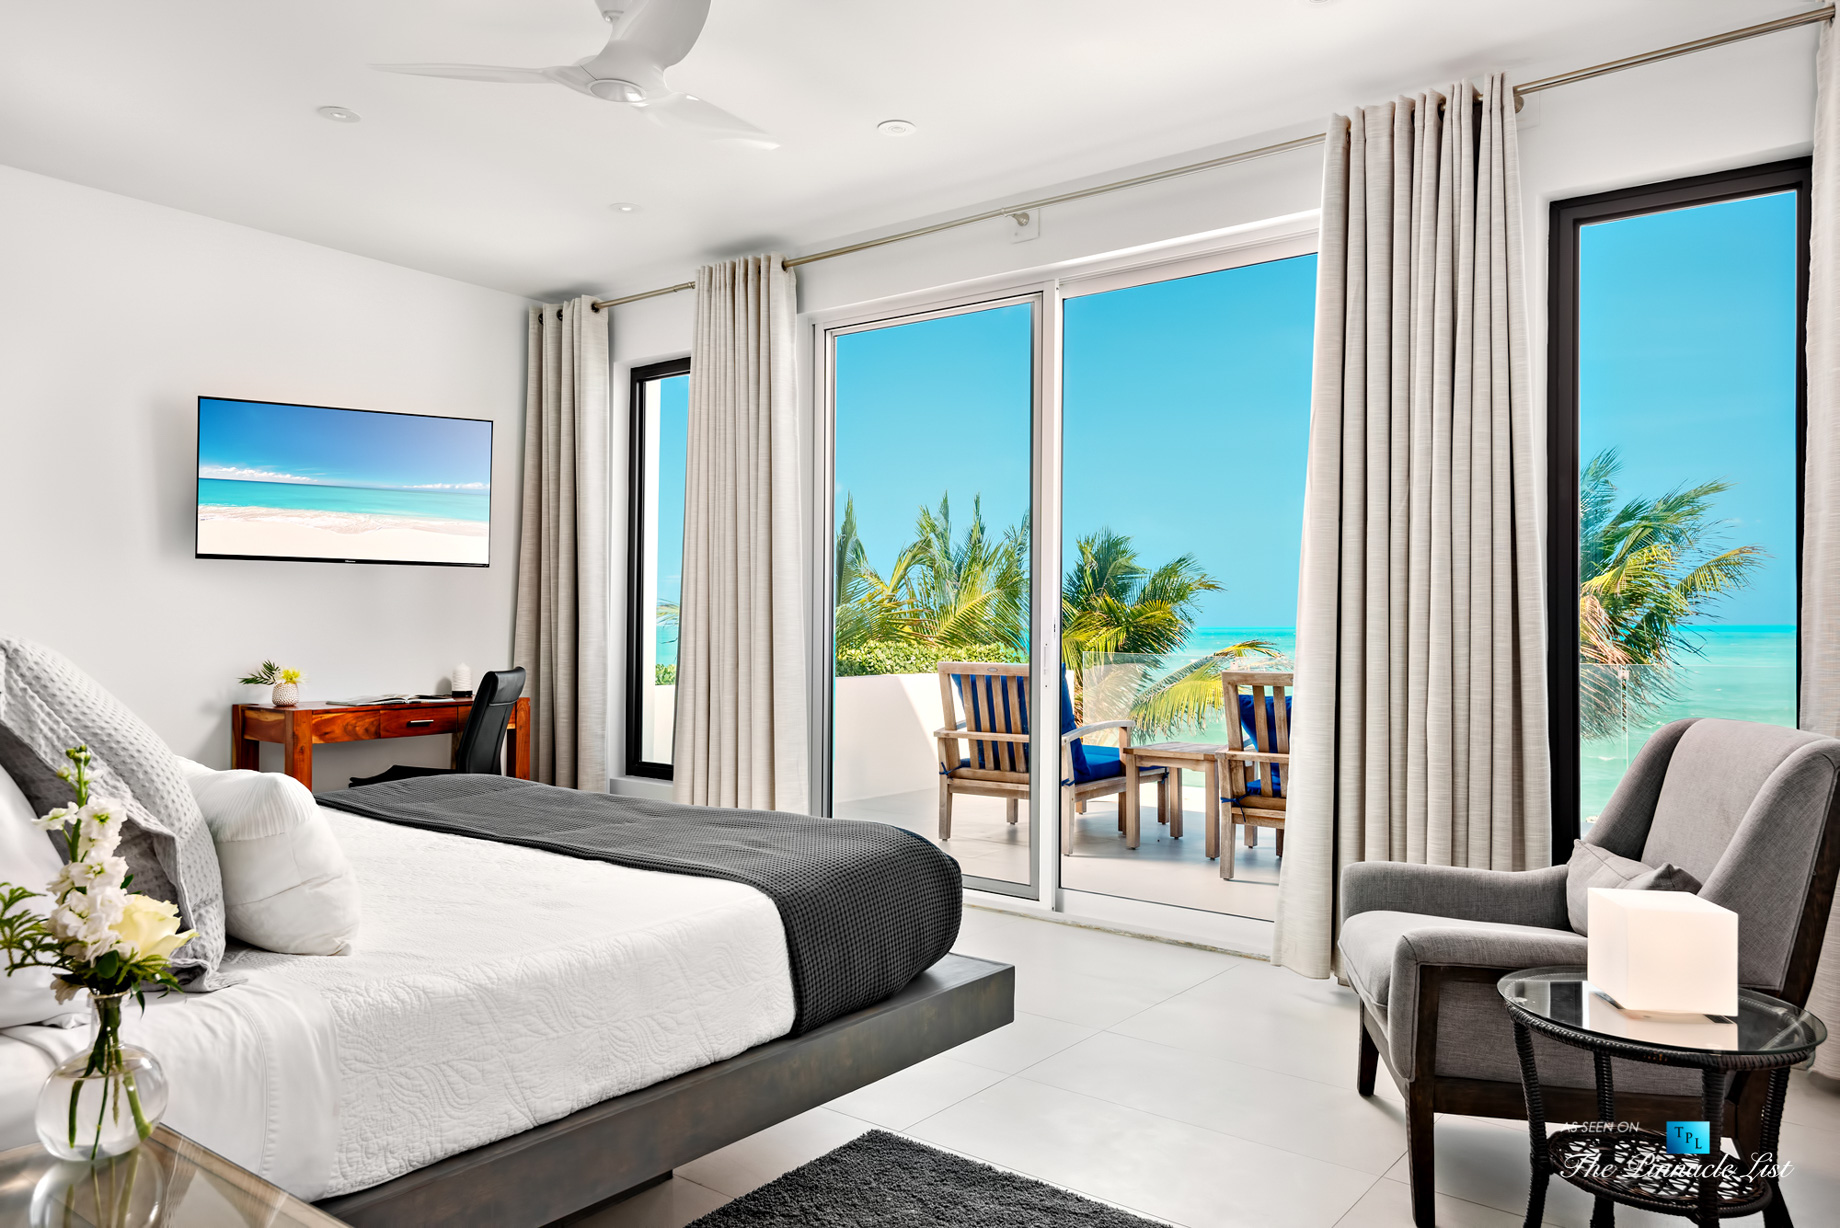 Tip of the Tail Villa – Providenciales, Turks and Caicos Islands – Caribbean House Bedroom – Luxury Real Estate – South Shore Peninsula Home